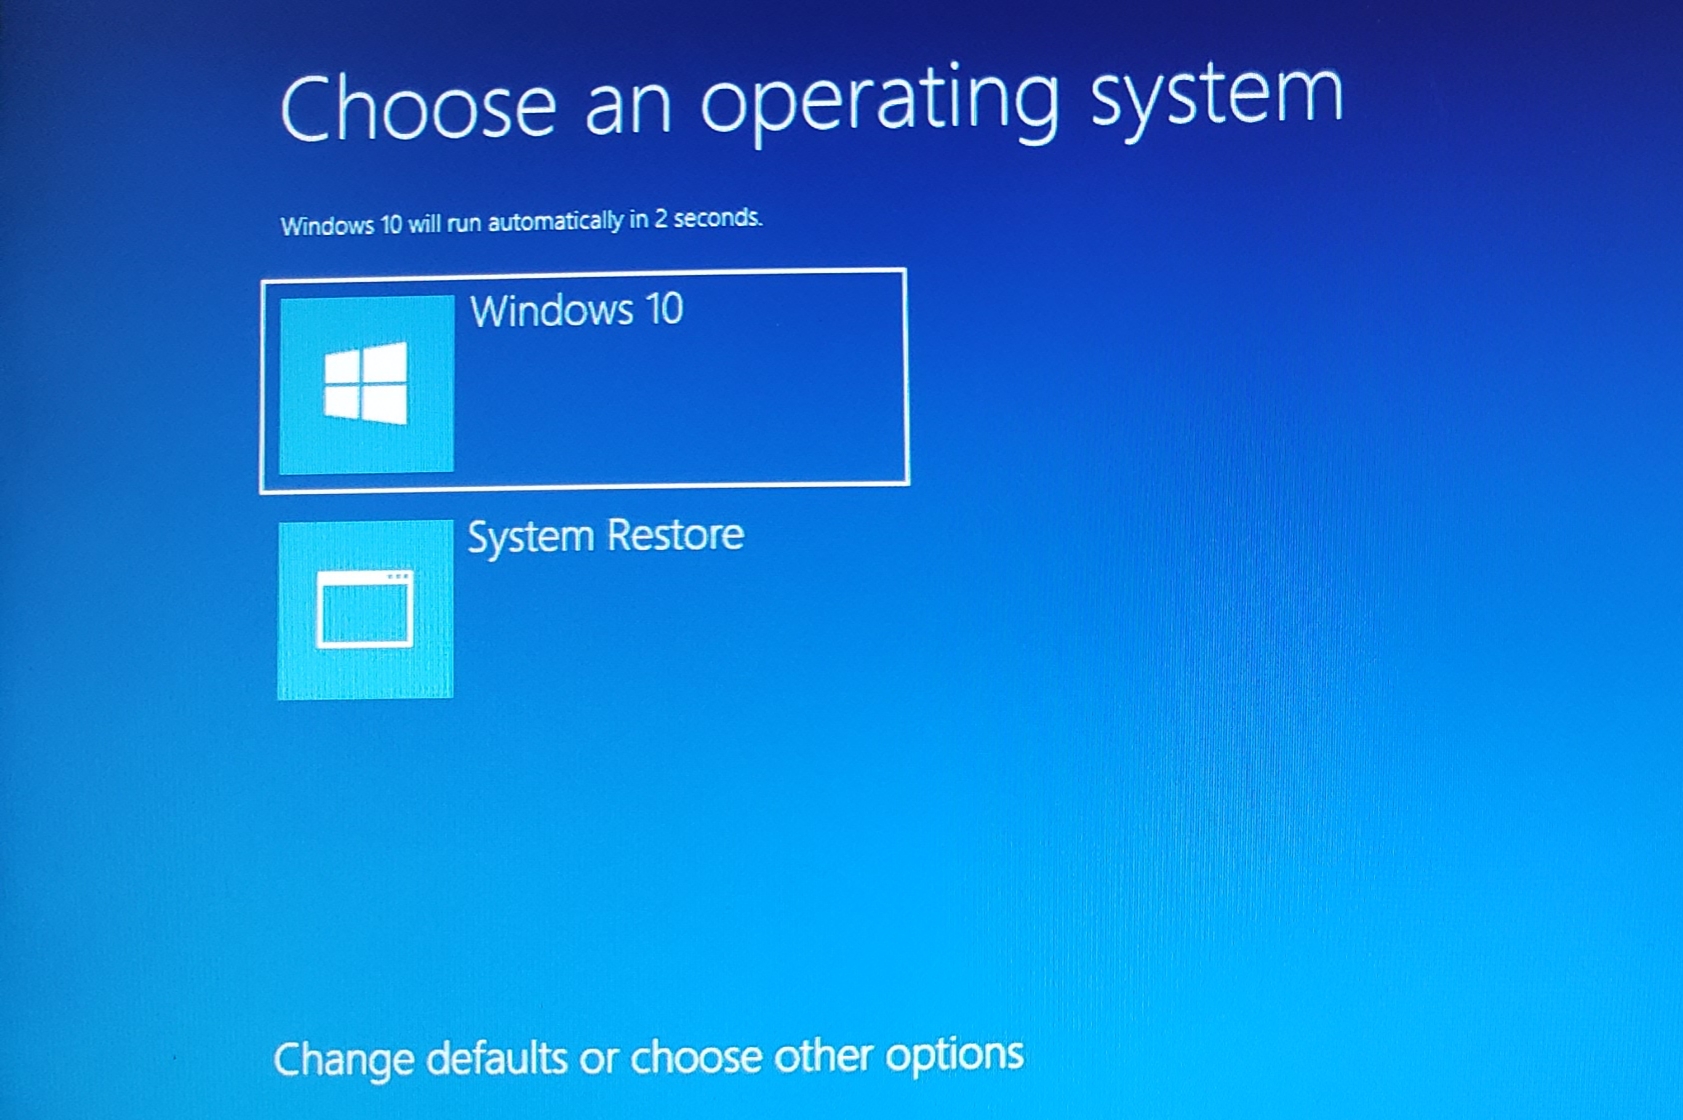 Option for Windows 10 or Restore on every re-start c98227af-765c-48f3-ae51-e73566cfd117?upload=true.jpg